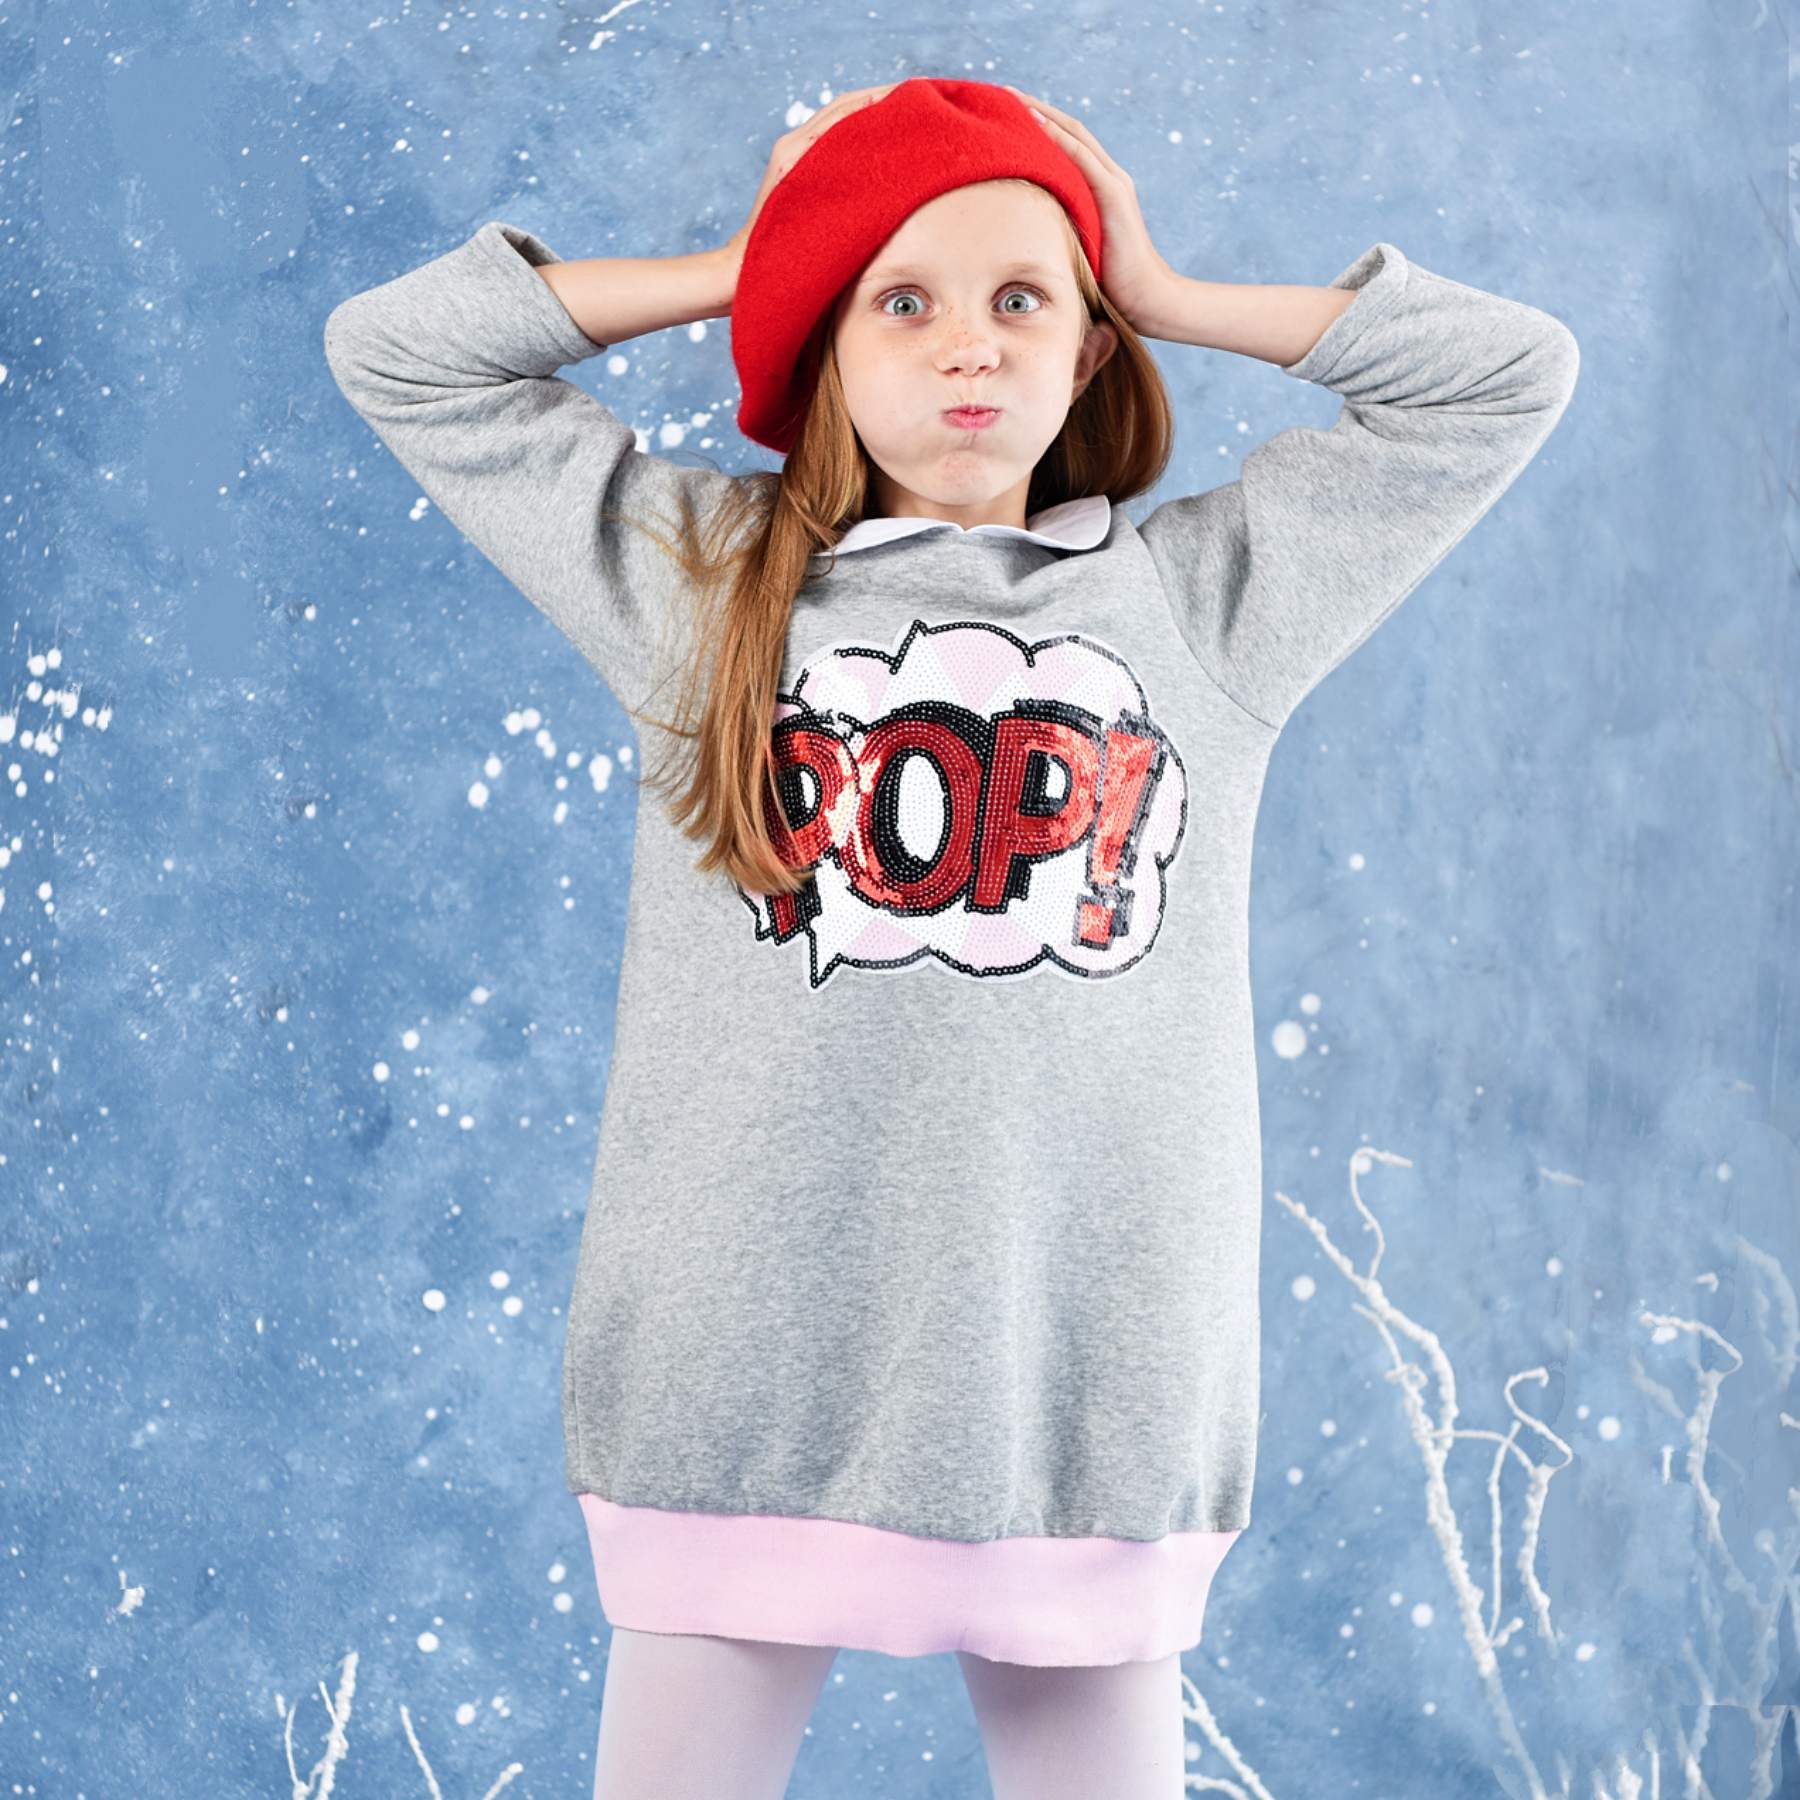 Mouse grey sweatshirt dress with white Claudine collar and sequins POP crest from the children's fashion brand LA FAUTE A VOLTAIRE